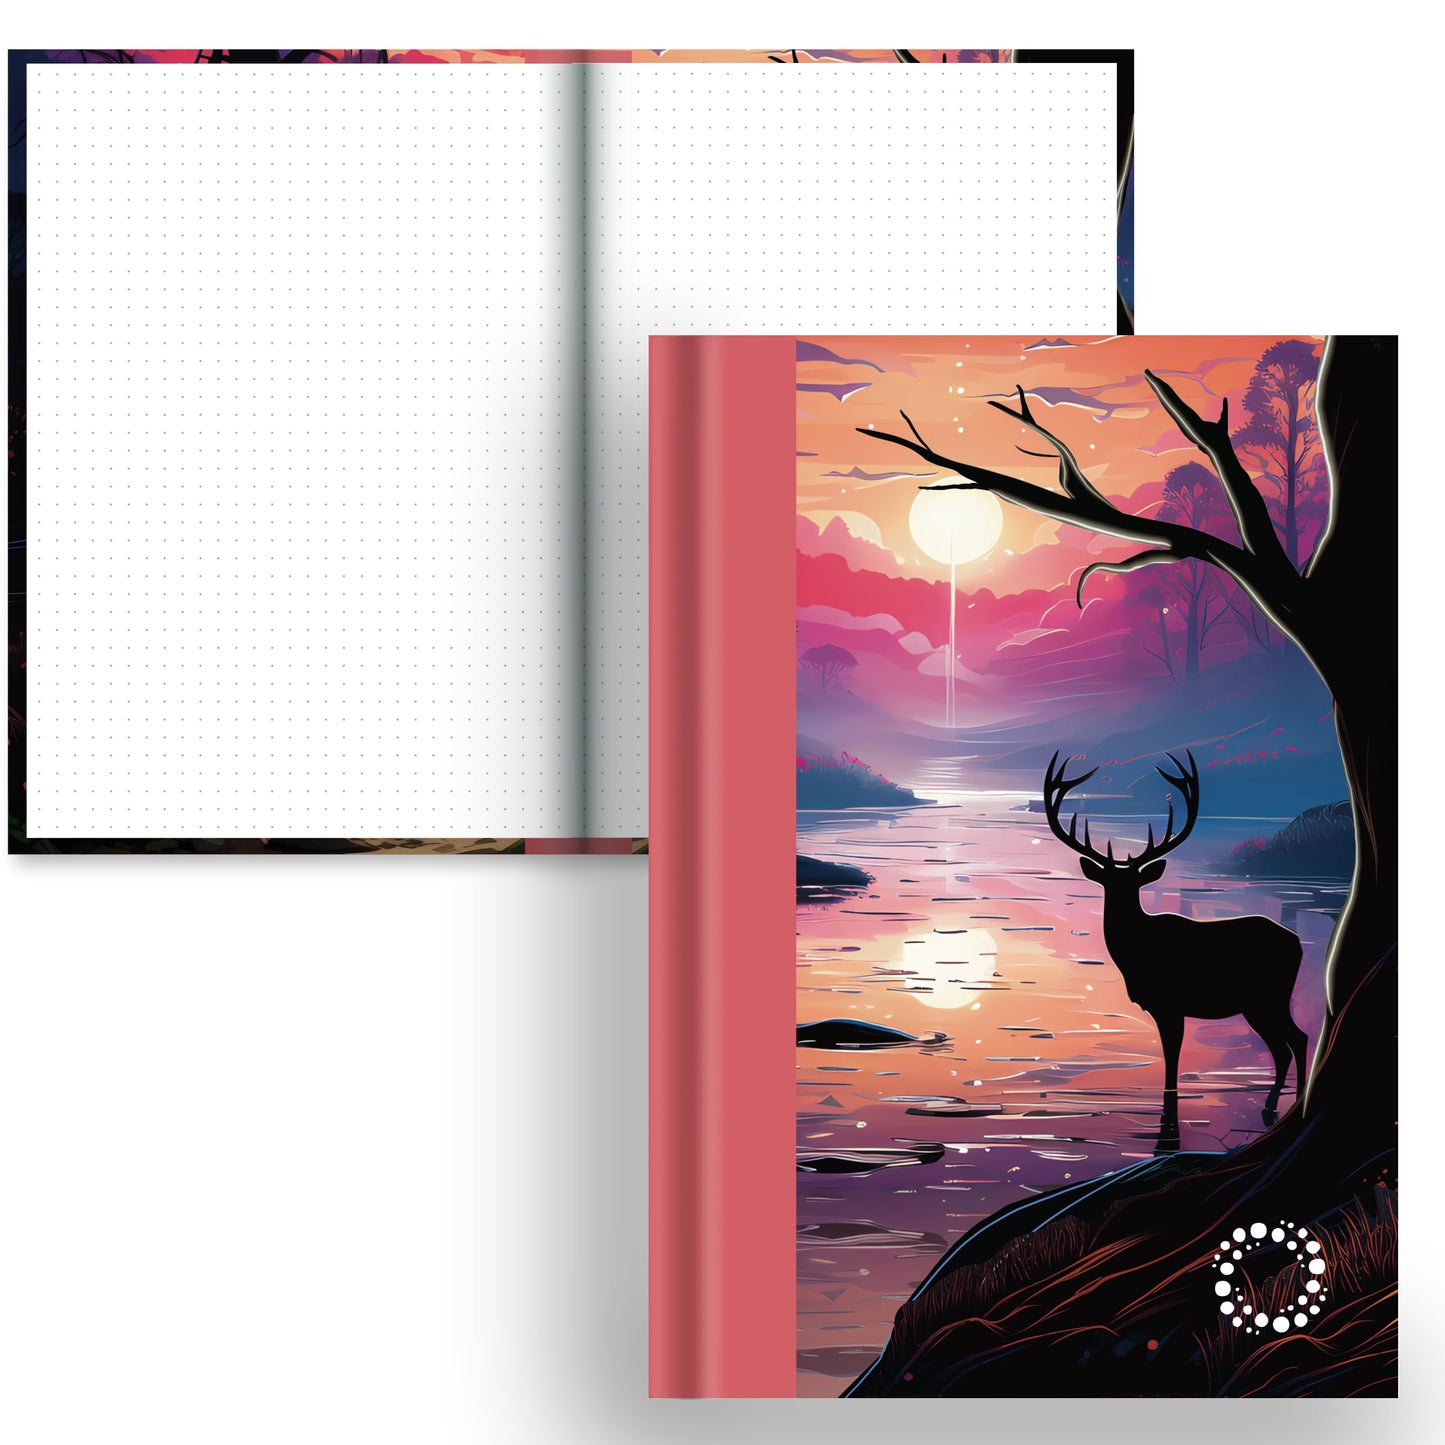 Deer in a Forest at Sunset on a notebook with a dot grid interior